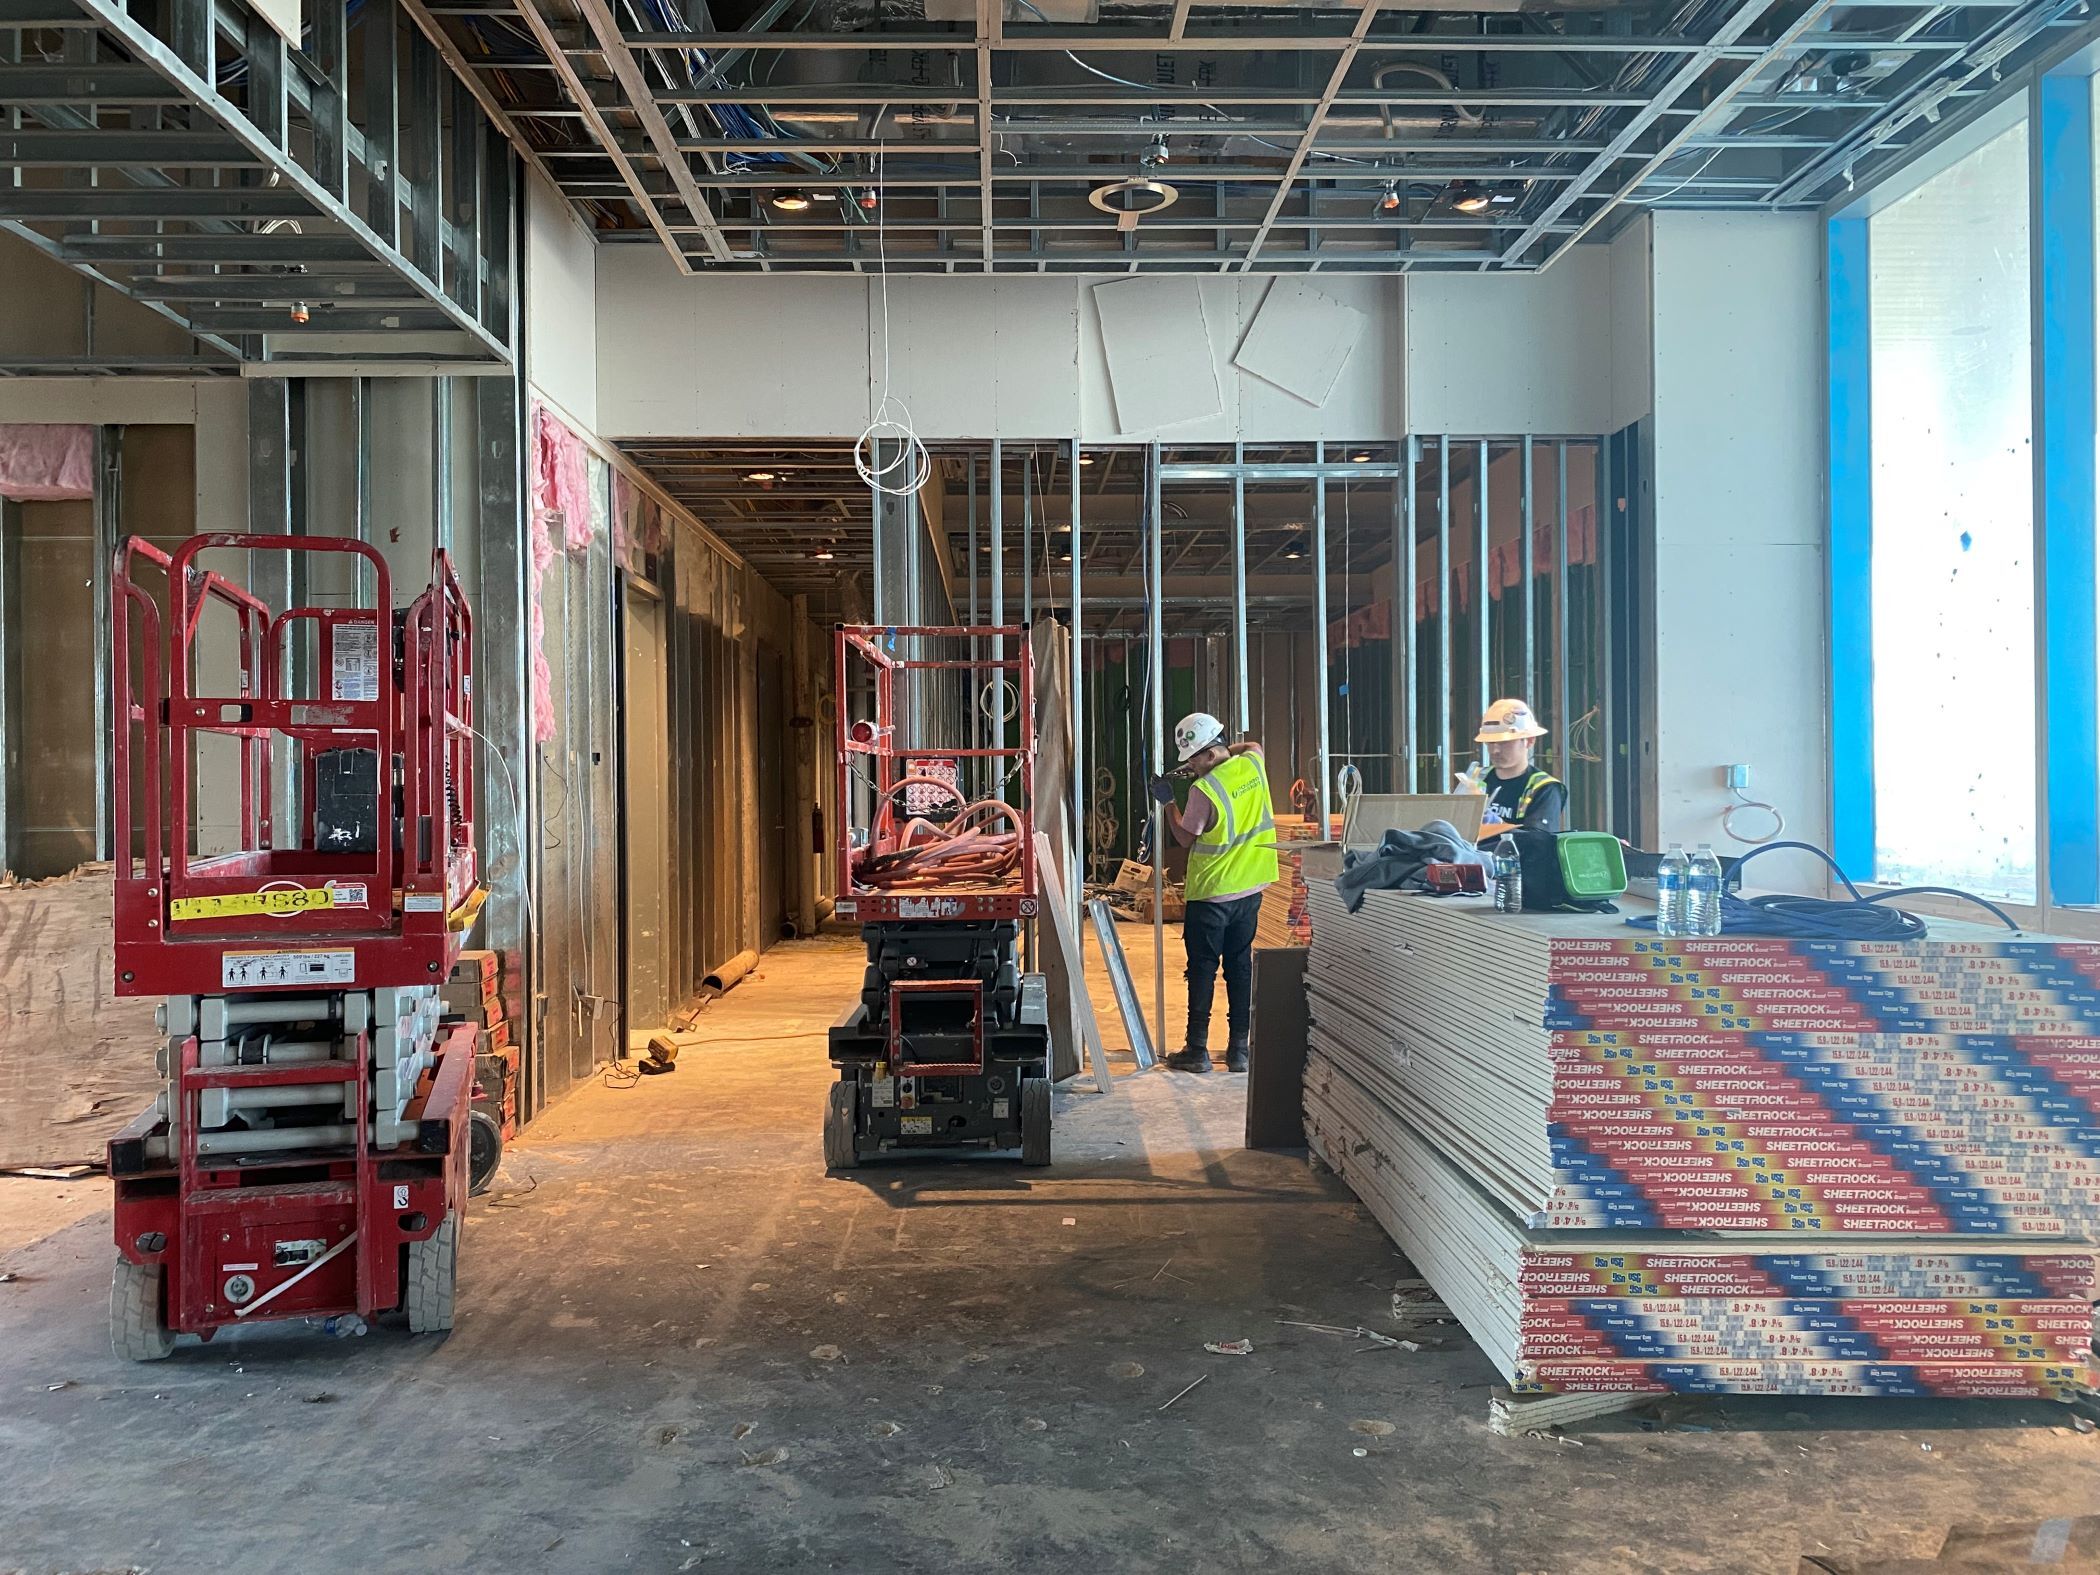 Lincoln Property Co. and Kairoi Residential are developing Sixth and Guadalupe in downtown Austin, Texas. Pictured is construction of the residential amenity area on floor 34. (Parimal M. Rohit/CoStar News)